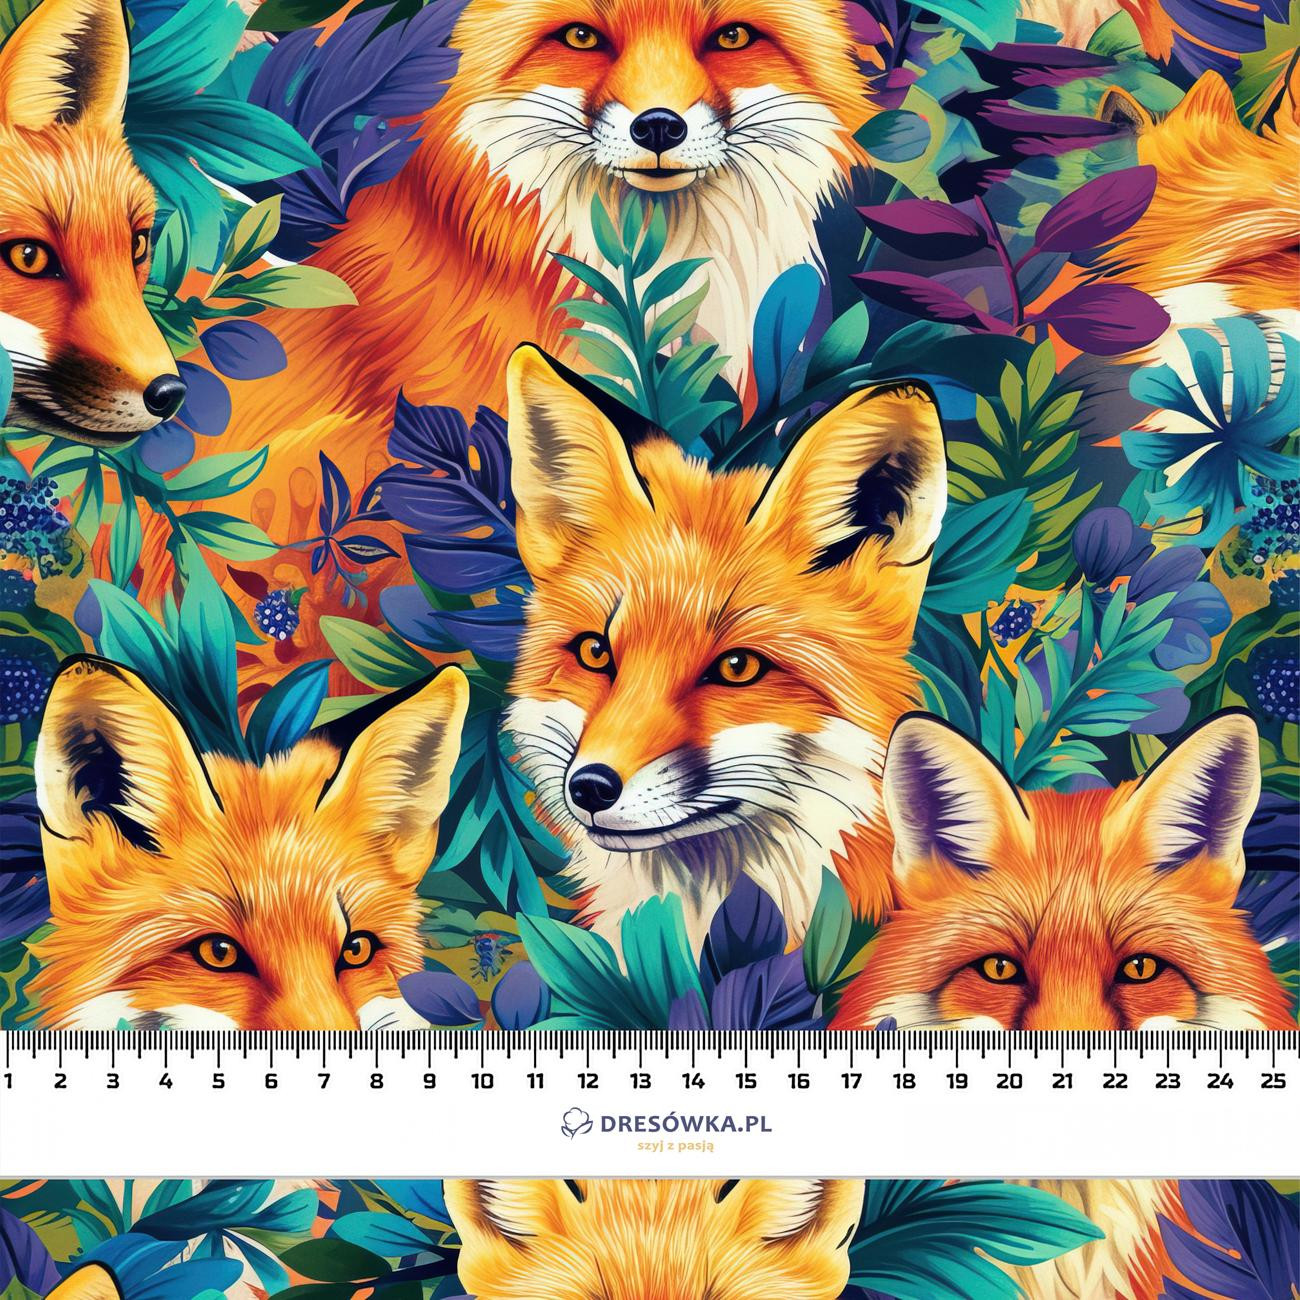 FOXES